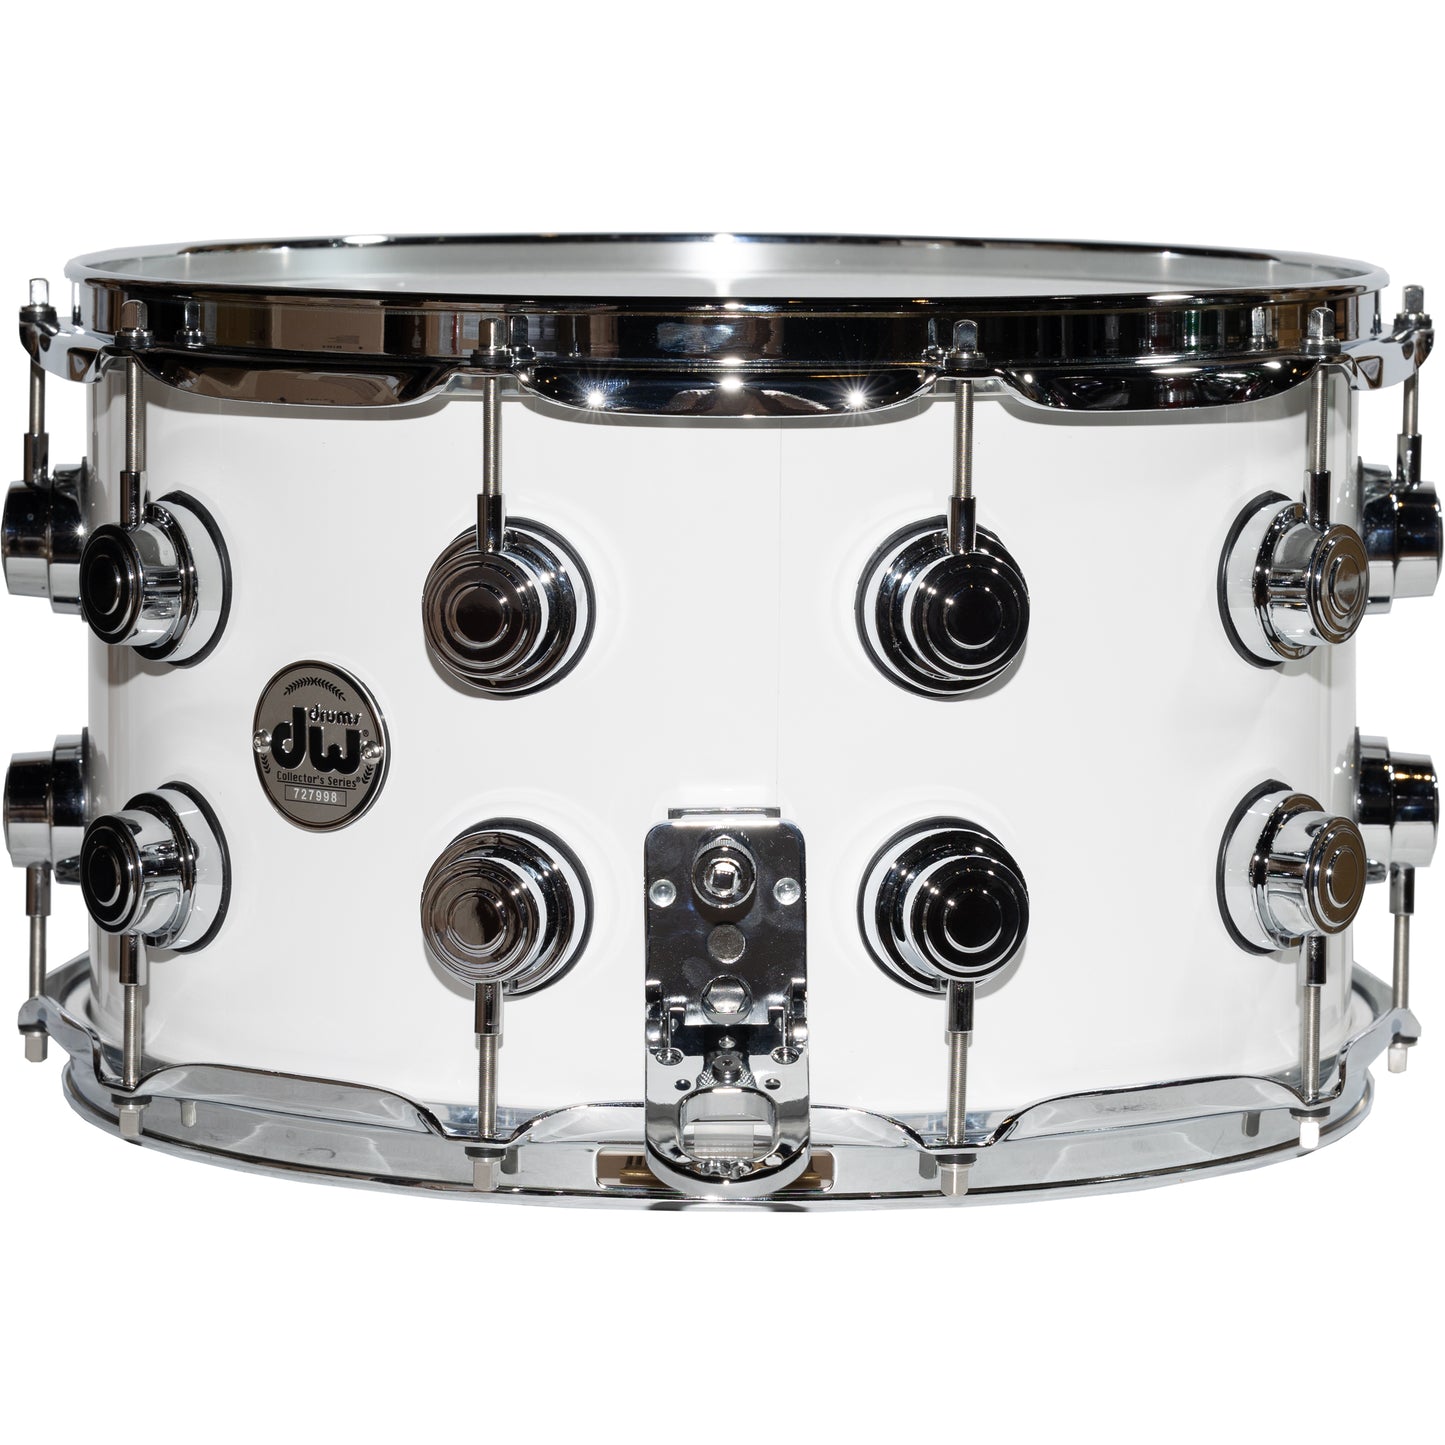 Drum Workshop Collectors Series 8x14 Snare Drum - Gloss White